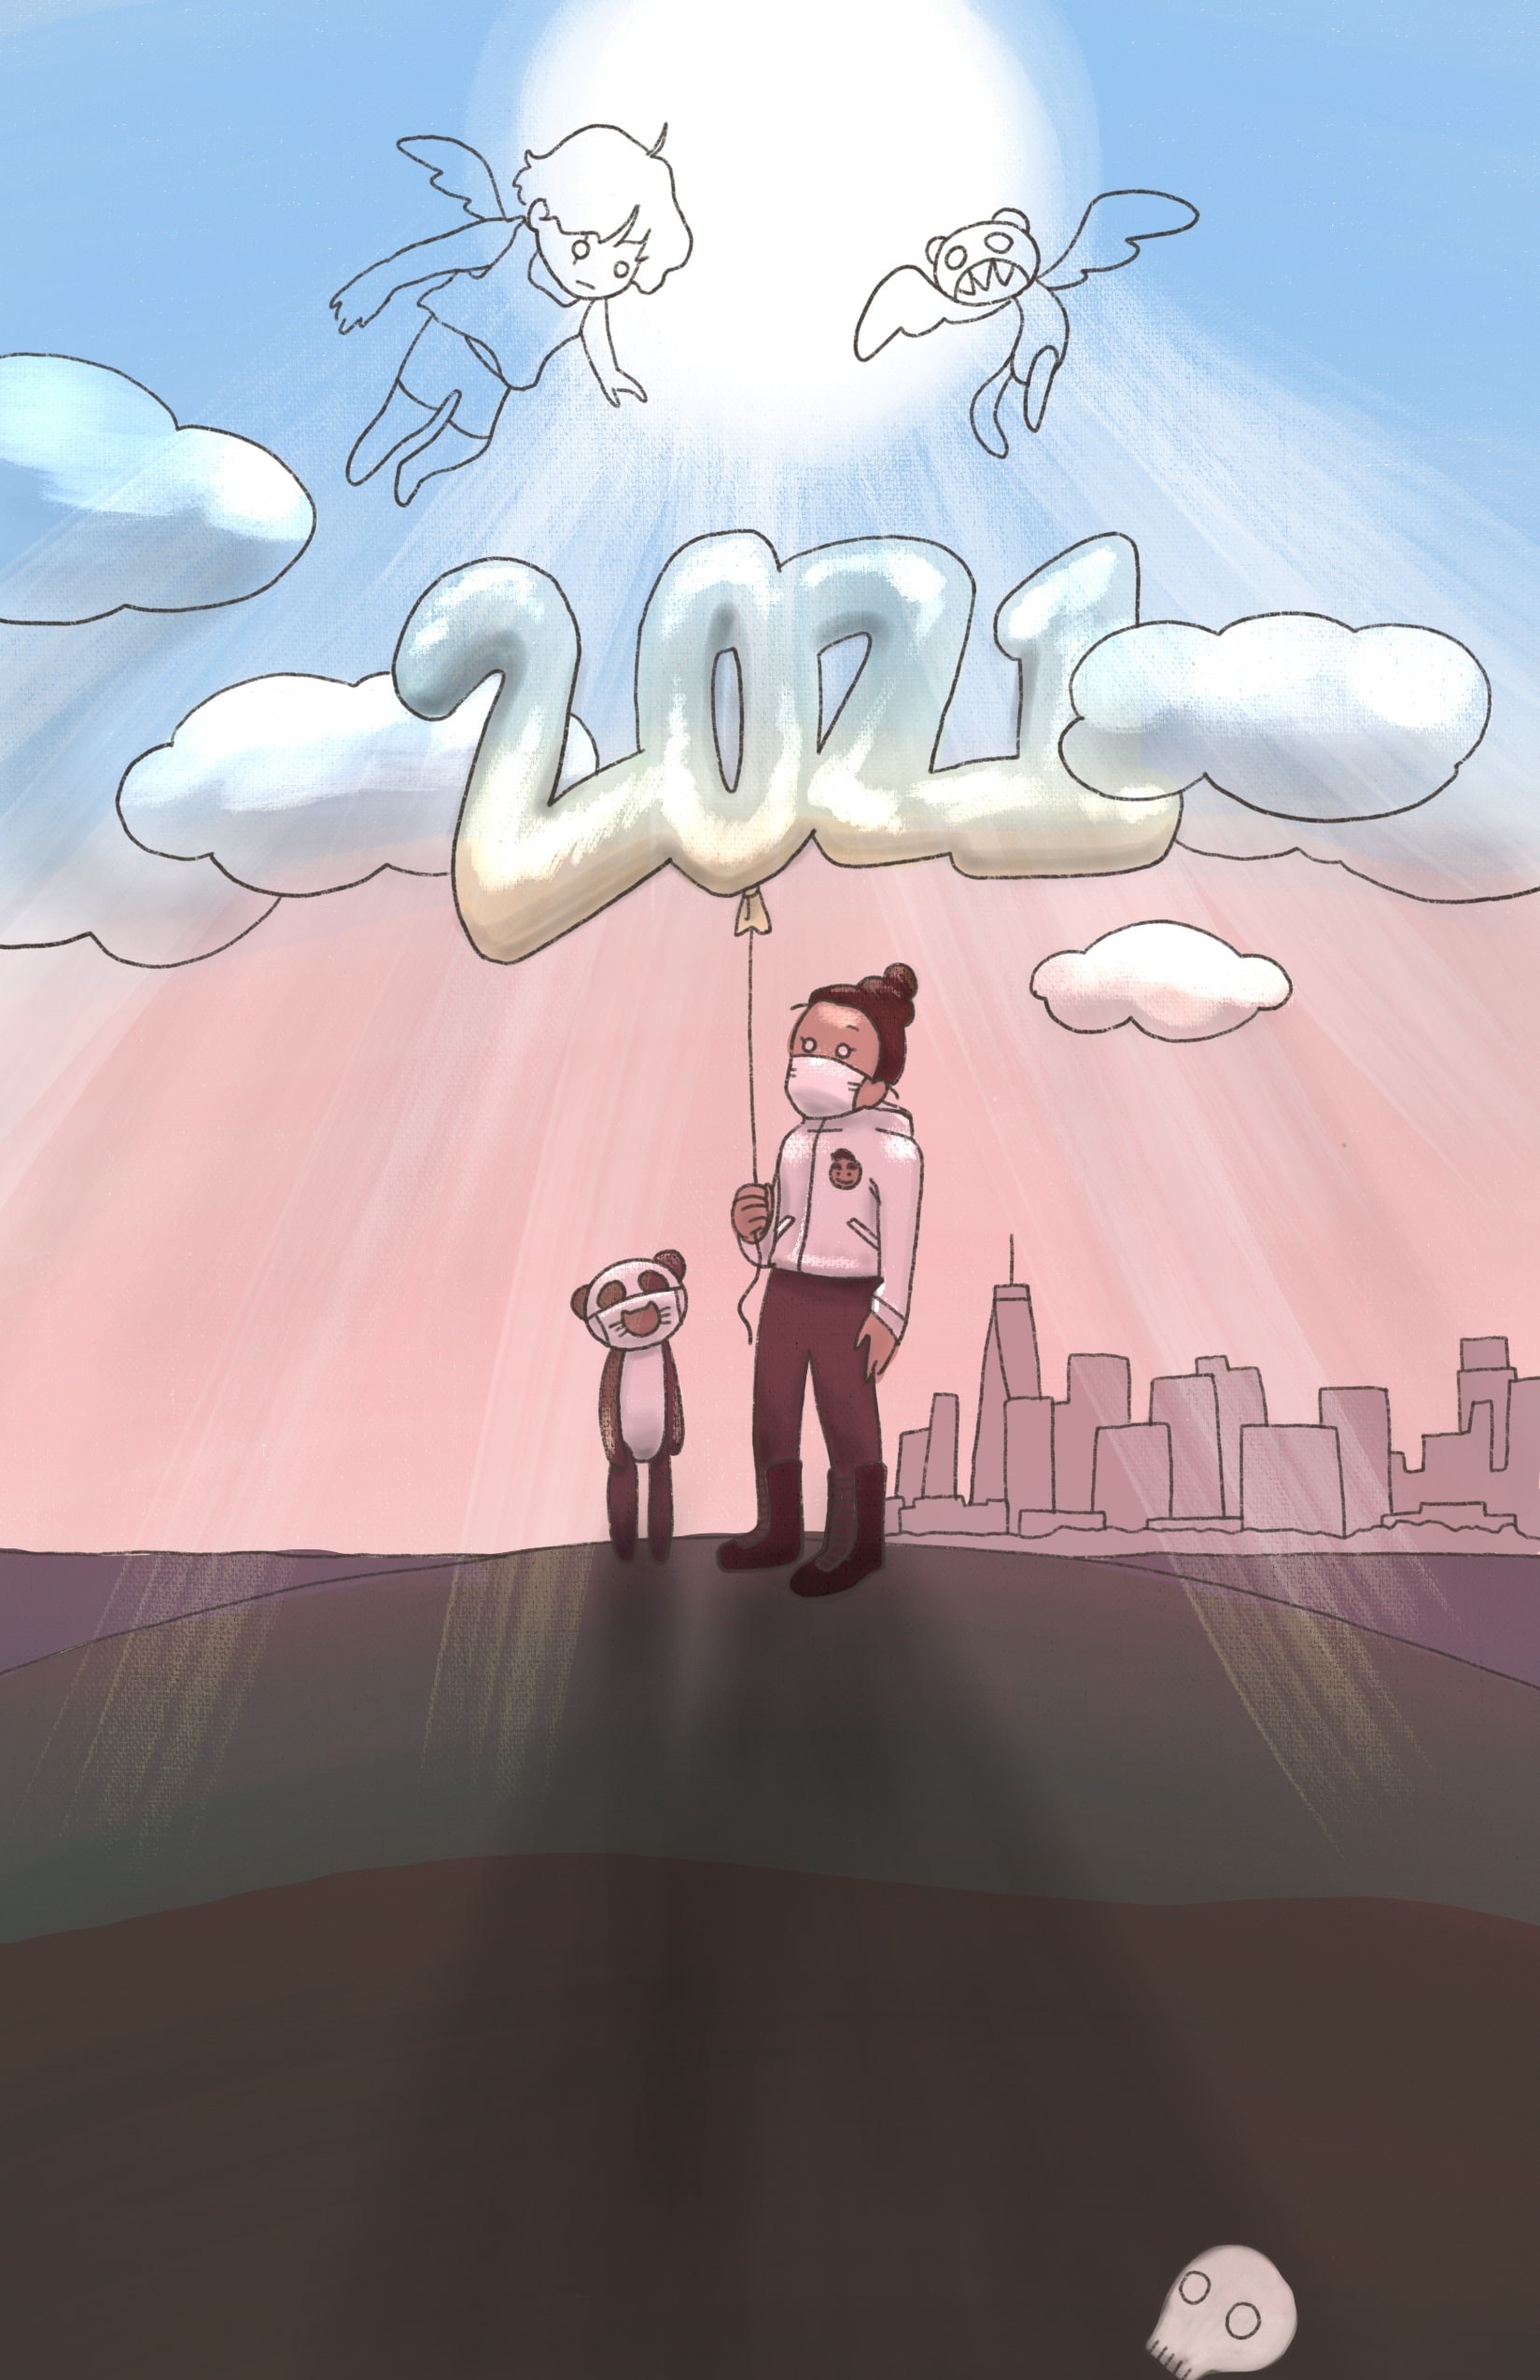 An illustration: Yoko in a mask, standing on a hill with water and a skyline of Lower Manhattan in the background. Panda is next to her, also wearing a mask. Yoko is holding a big balloon that says “2021,” which goes into the clouds. Above the clouds are Little Wing and a Winged Panda, looking down at Yoko and Panda. There is a sun shining down, coming a little bit through the clouds. Deep in the ground of the hill, there is a skull.